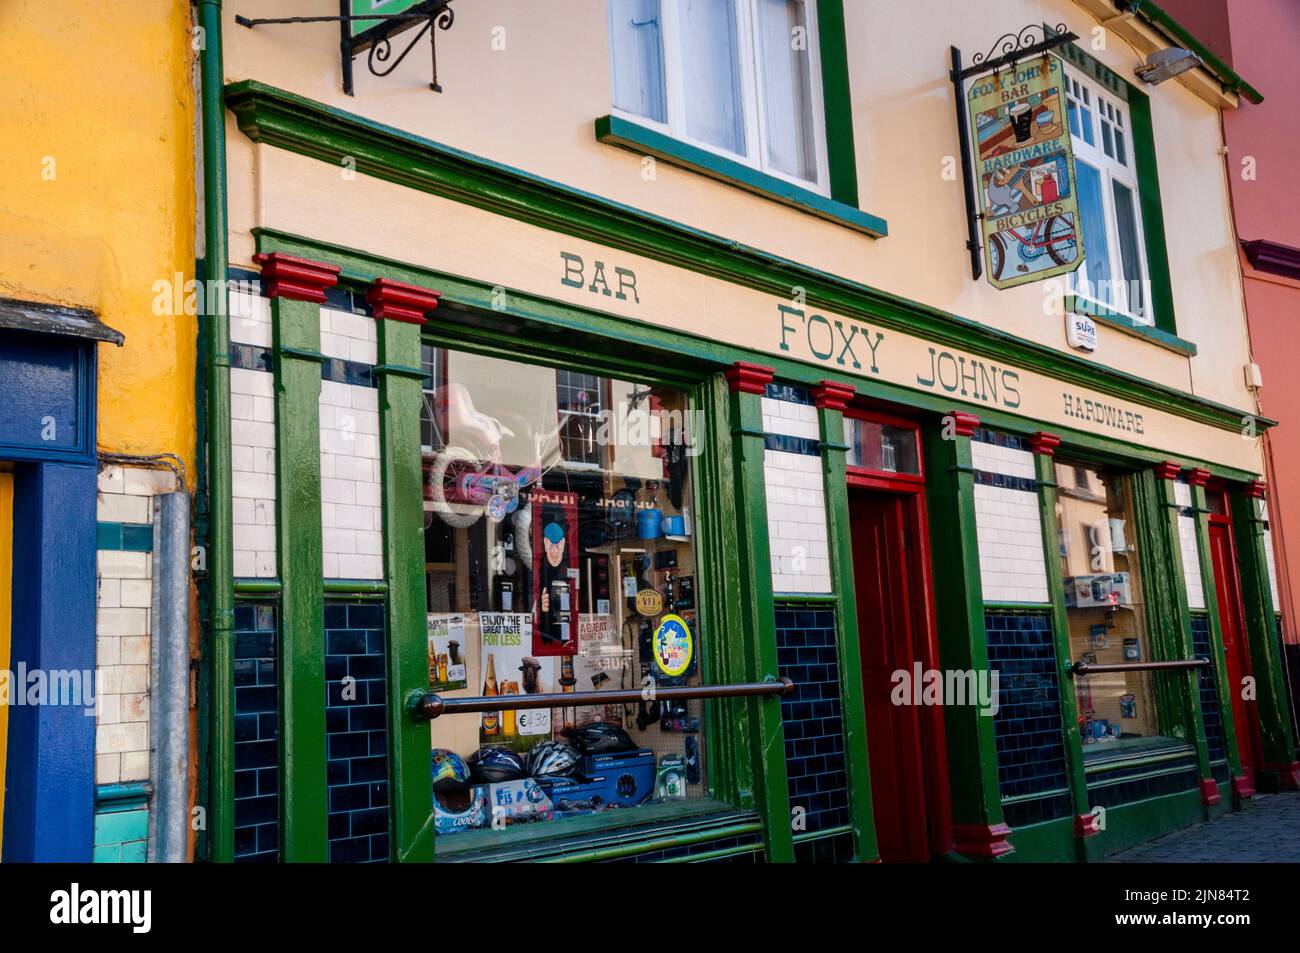 Foxy Johns is both a traditional Irish pub and hardware store in Dingle, Ireland. Stock Photo